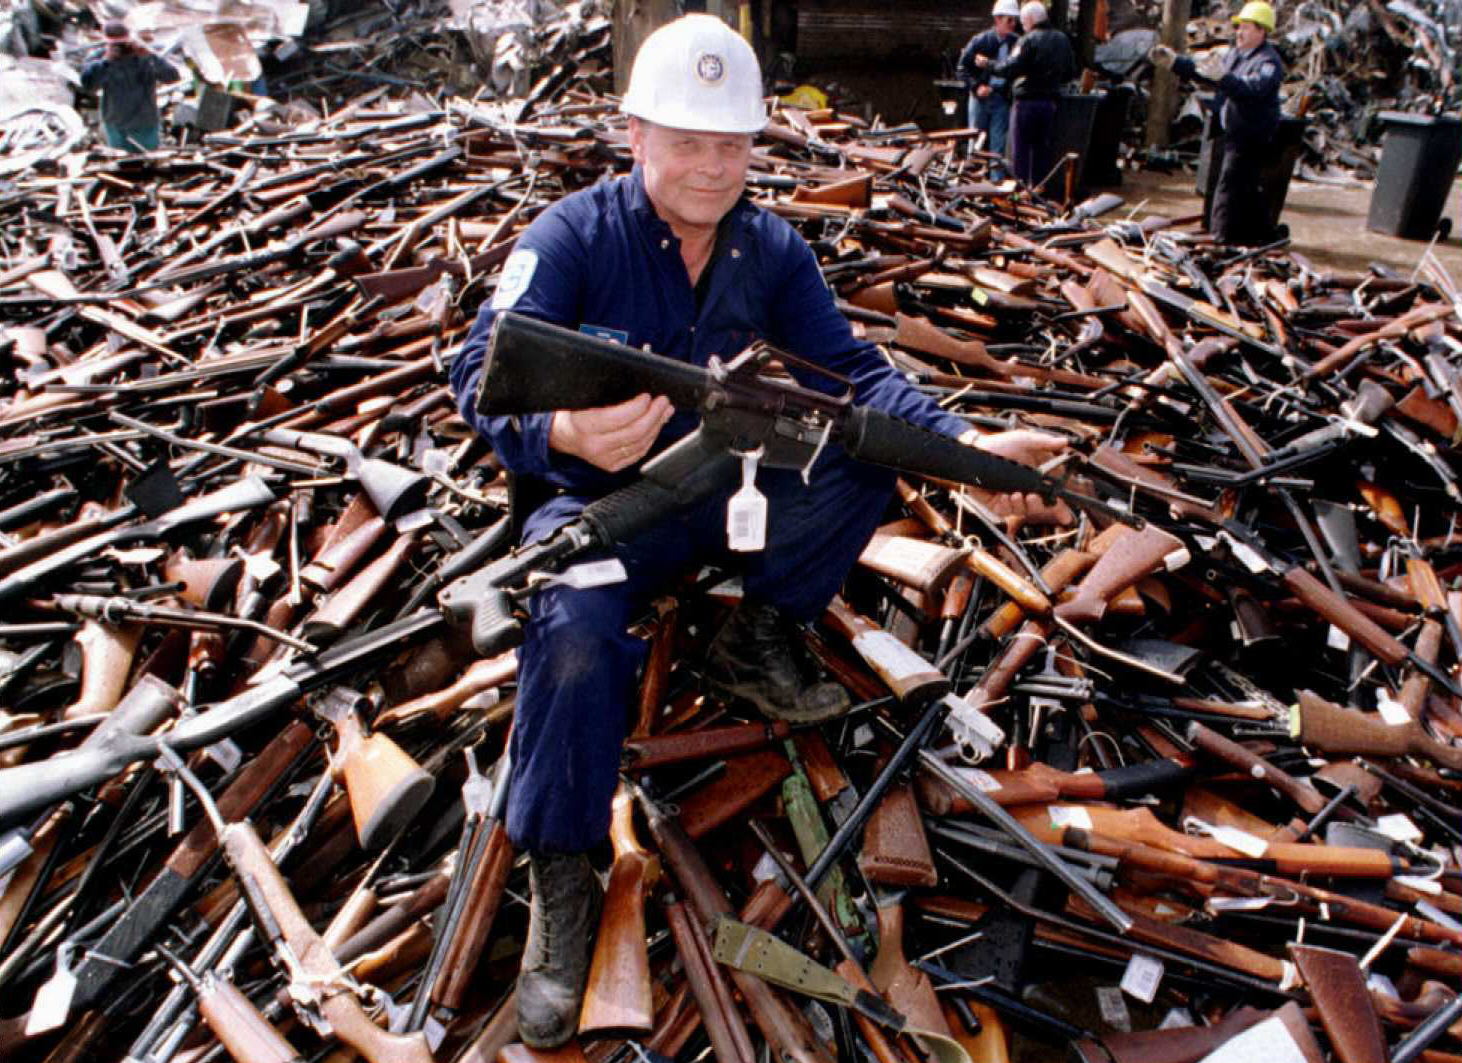 A security official holds an armalite rifle similar to the one used in the Port Arthur massacre, handed in for scrap in the gun amnesty 